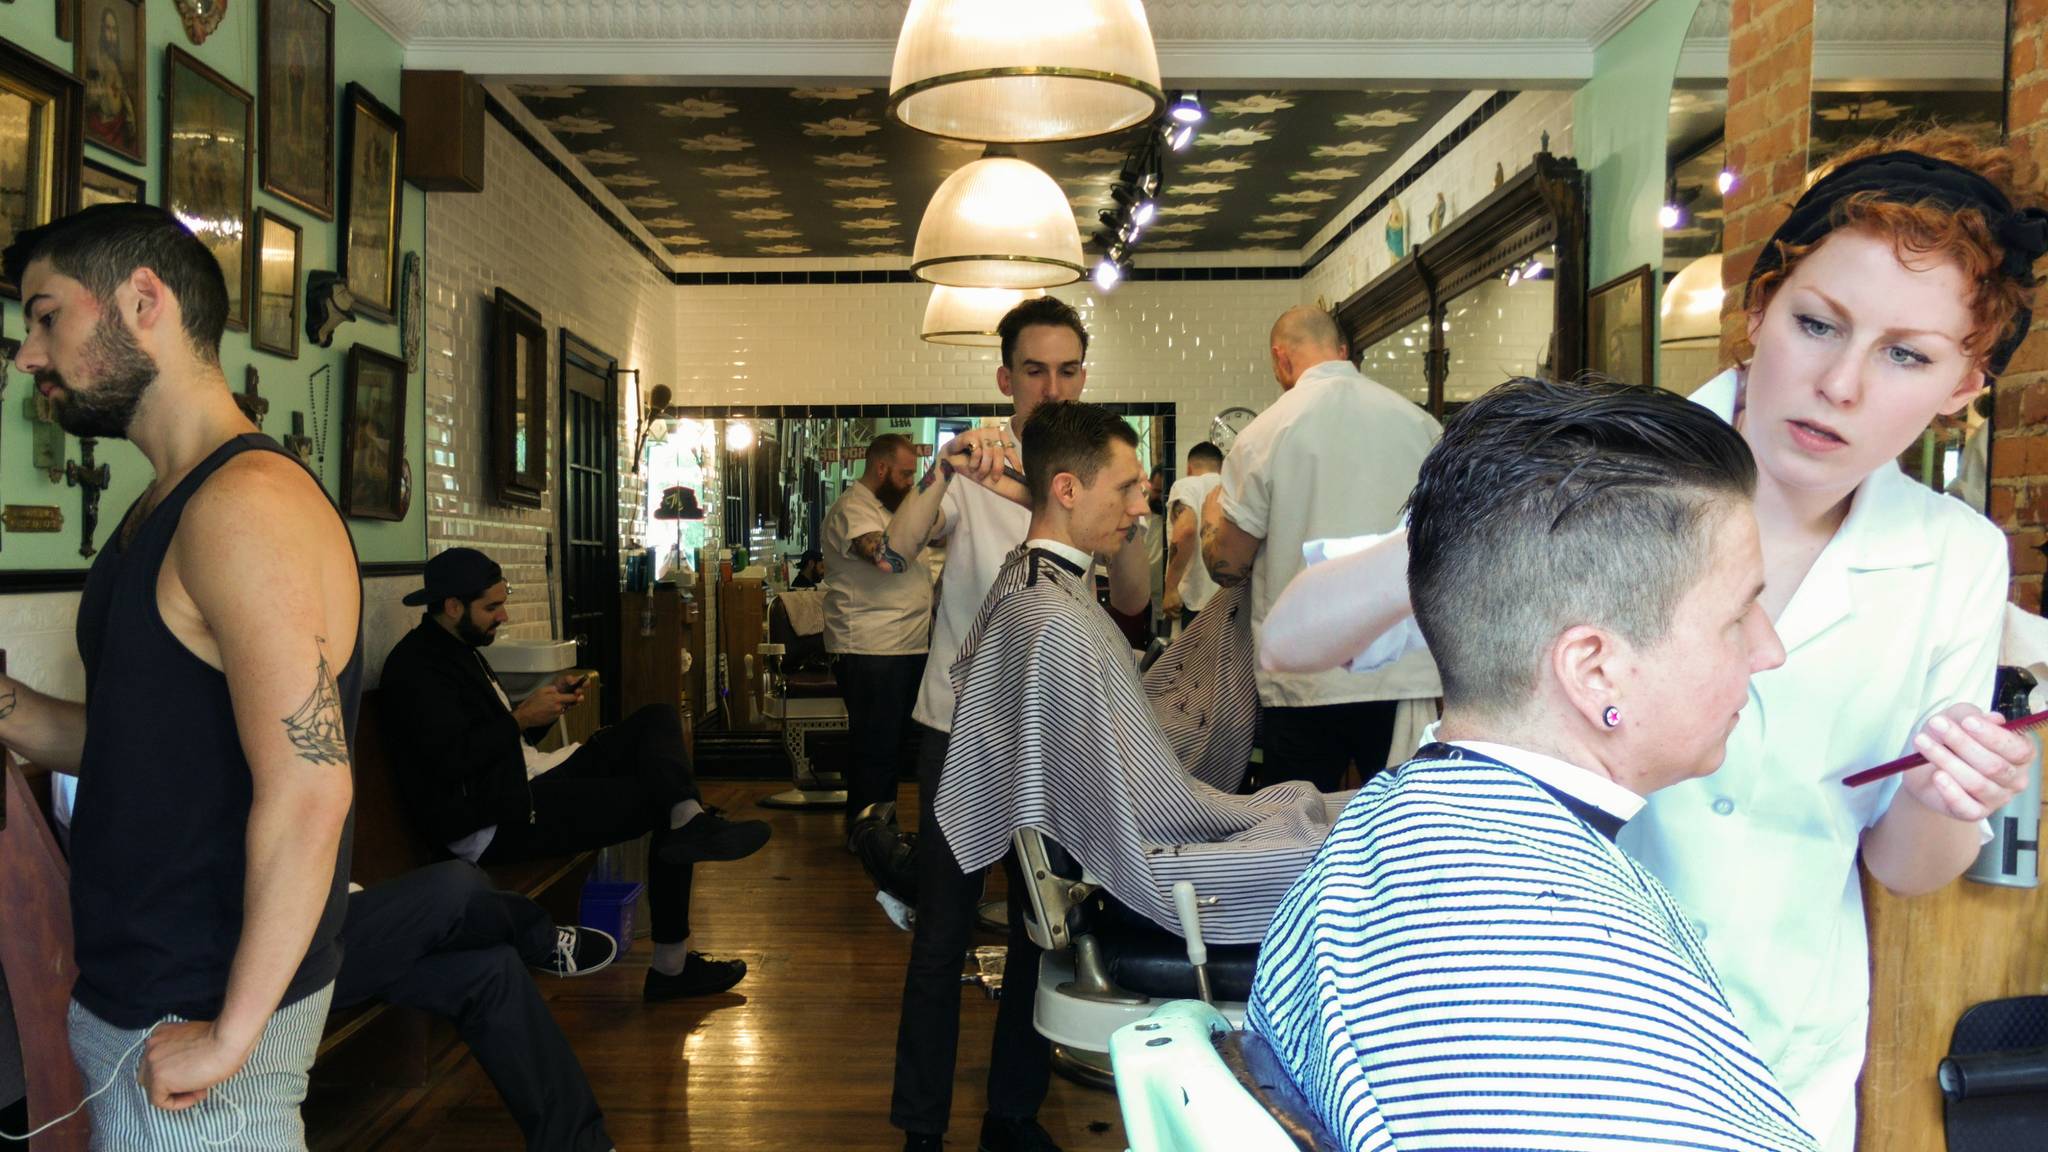 The classic barbershop is alive and well